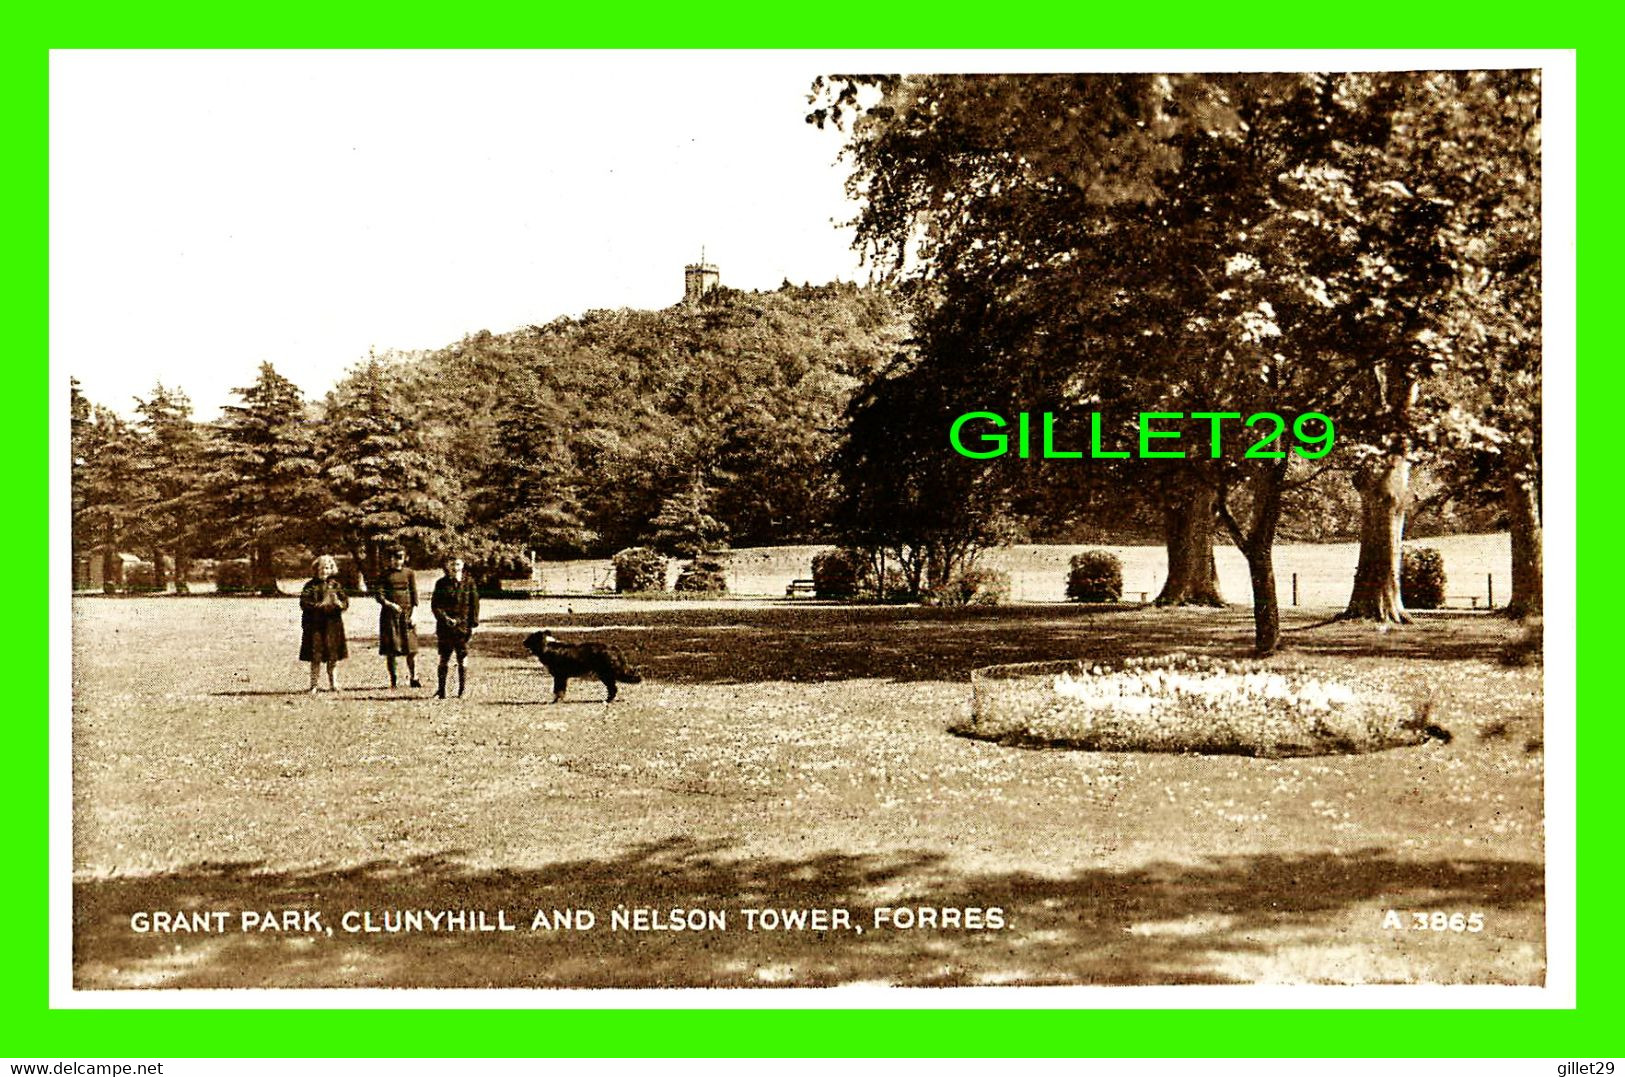 FORRES, SCOTLAND - GRANT PARK, CLUNYHILL AND NELSON TOWER - ANIMATED WITH PEOPLES - PHOTO BROWN - - Moray